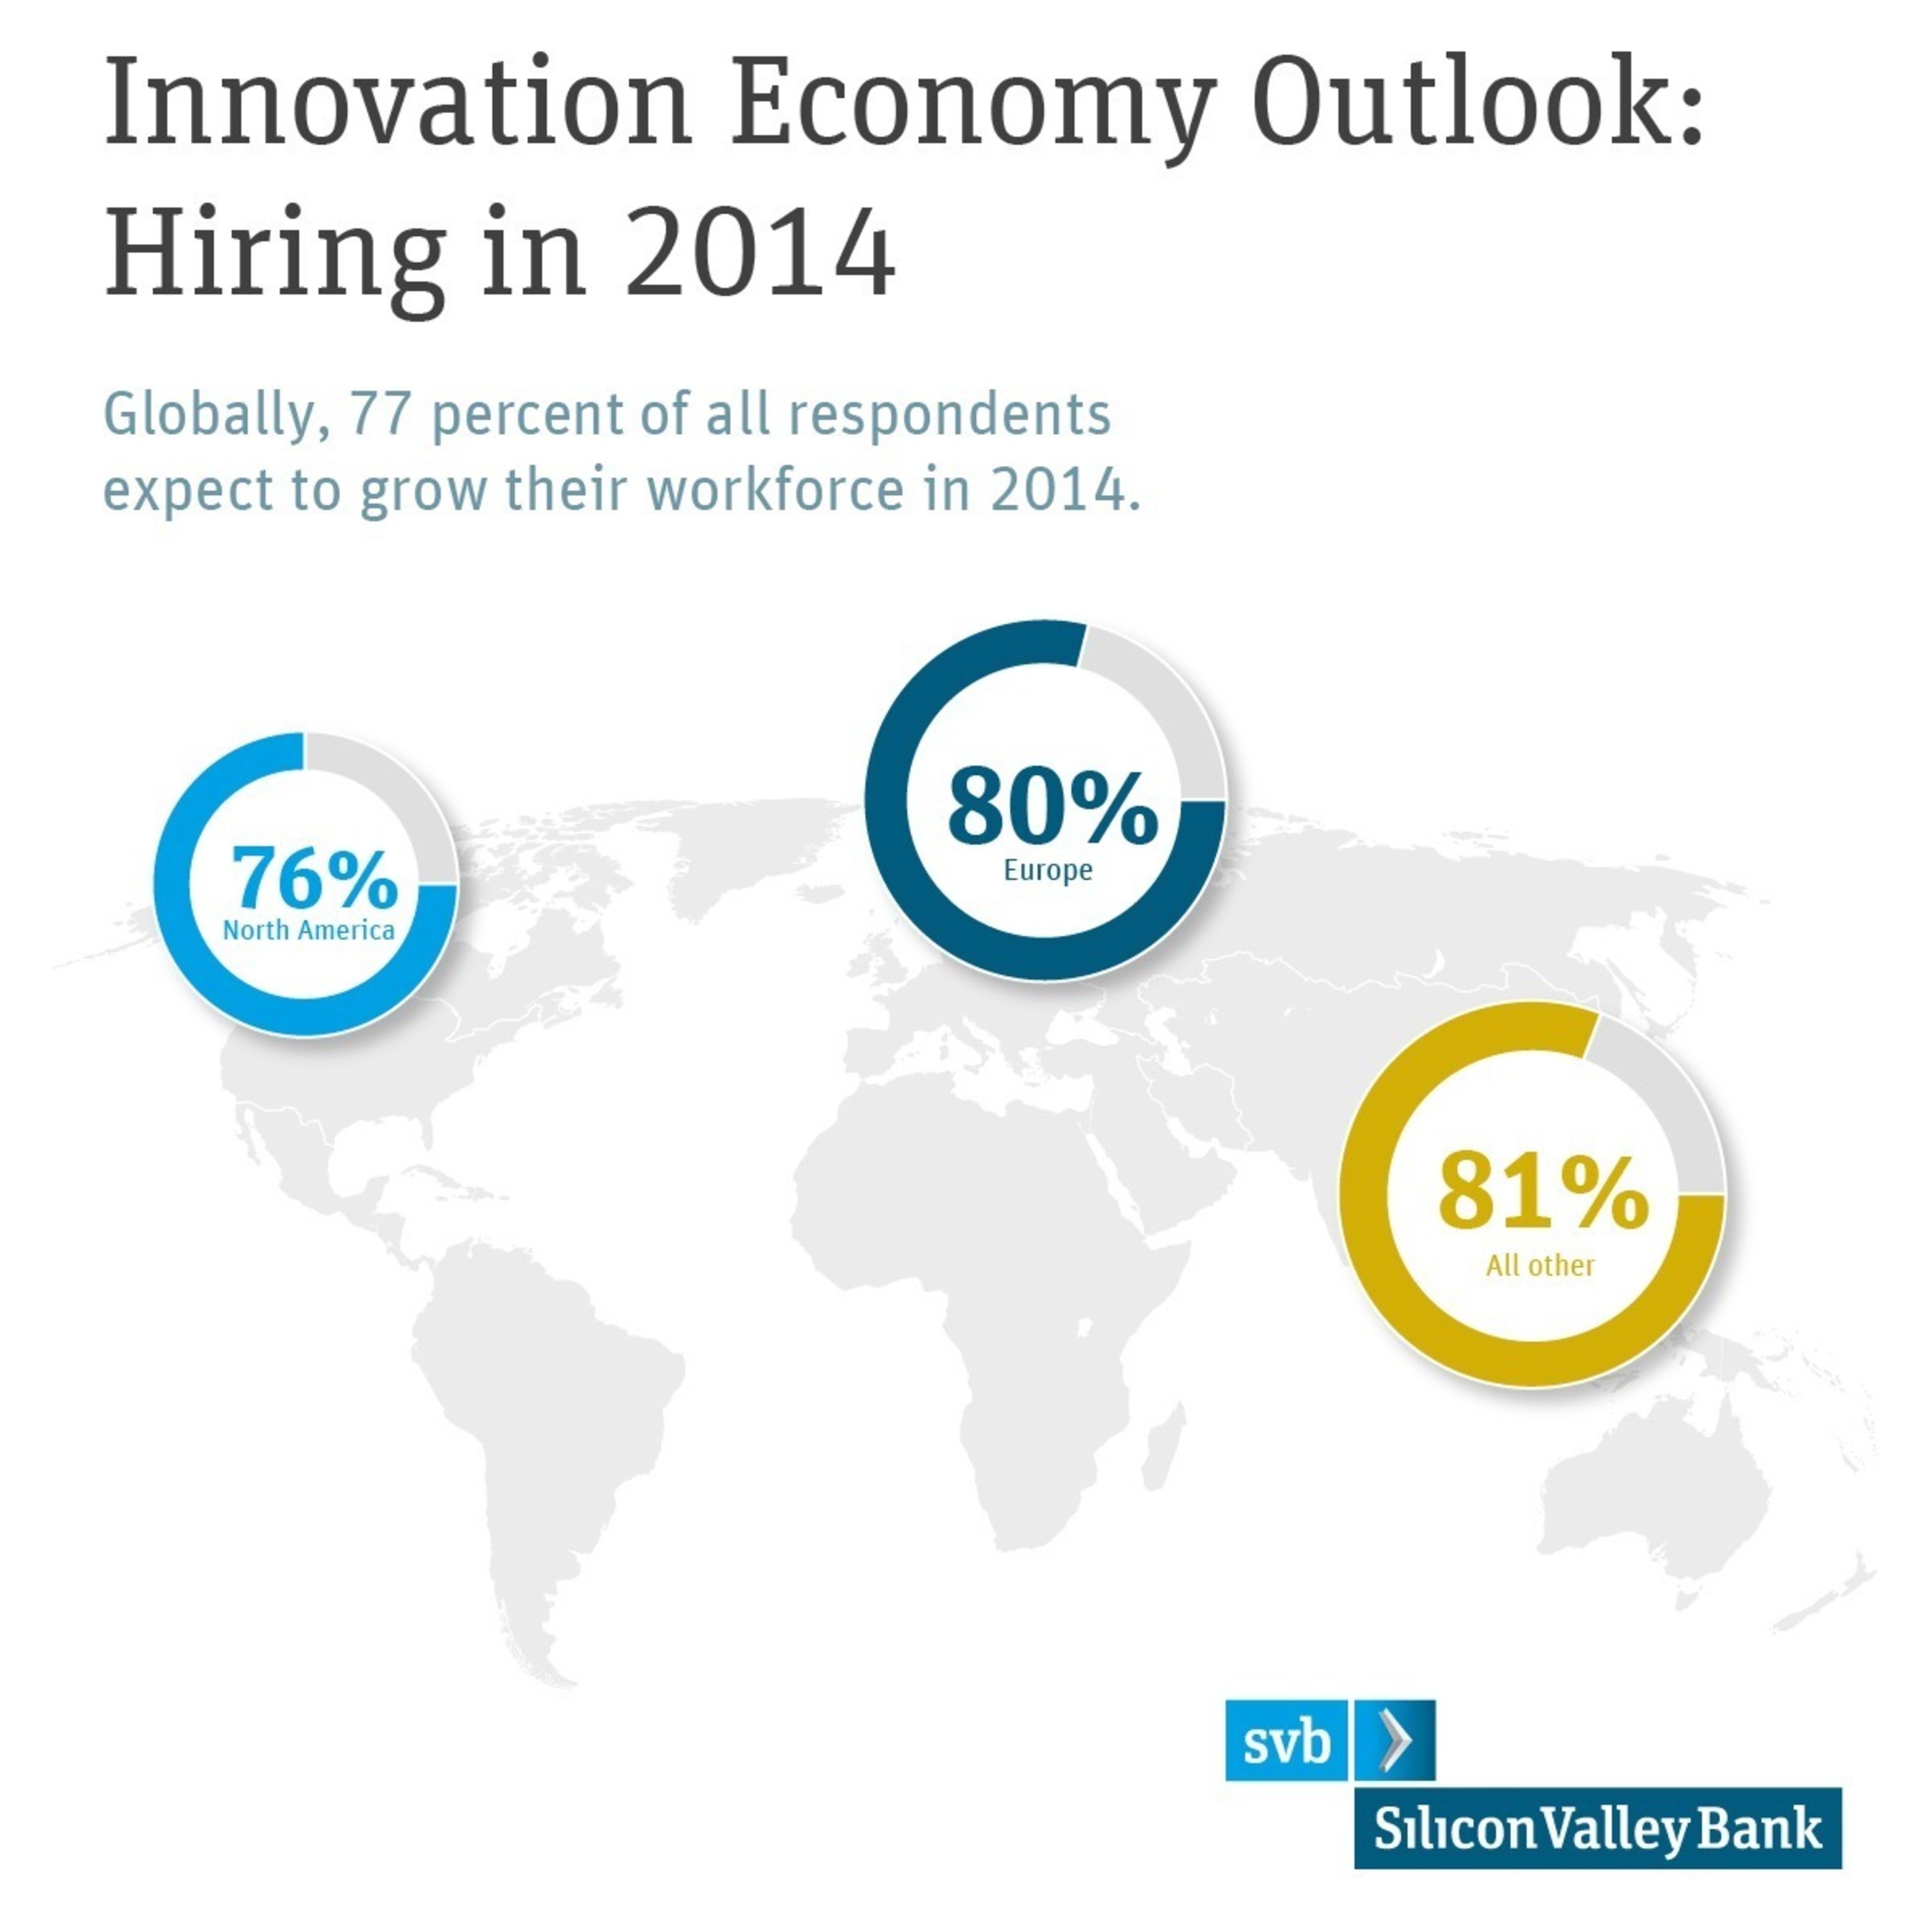 77% of small to mid-sized businesses in technology and healthcare industries around the world said they would be hiring new employees in 2014, according to the 2014 Innovation Economy Outlook by Silicon Valley Bank. Read the full report at http://www.svb.com/innovation-economy-outlook/  (PRNewsFoto/Silicon Valley Bank)